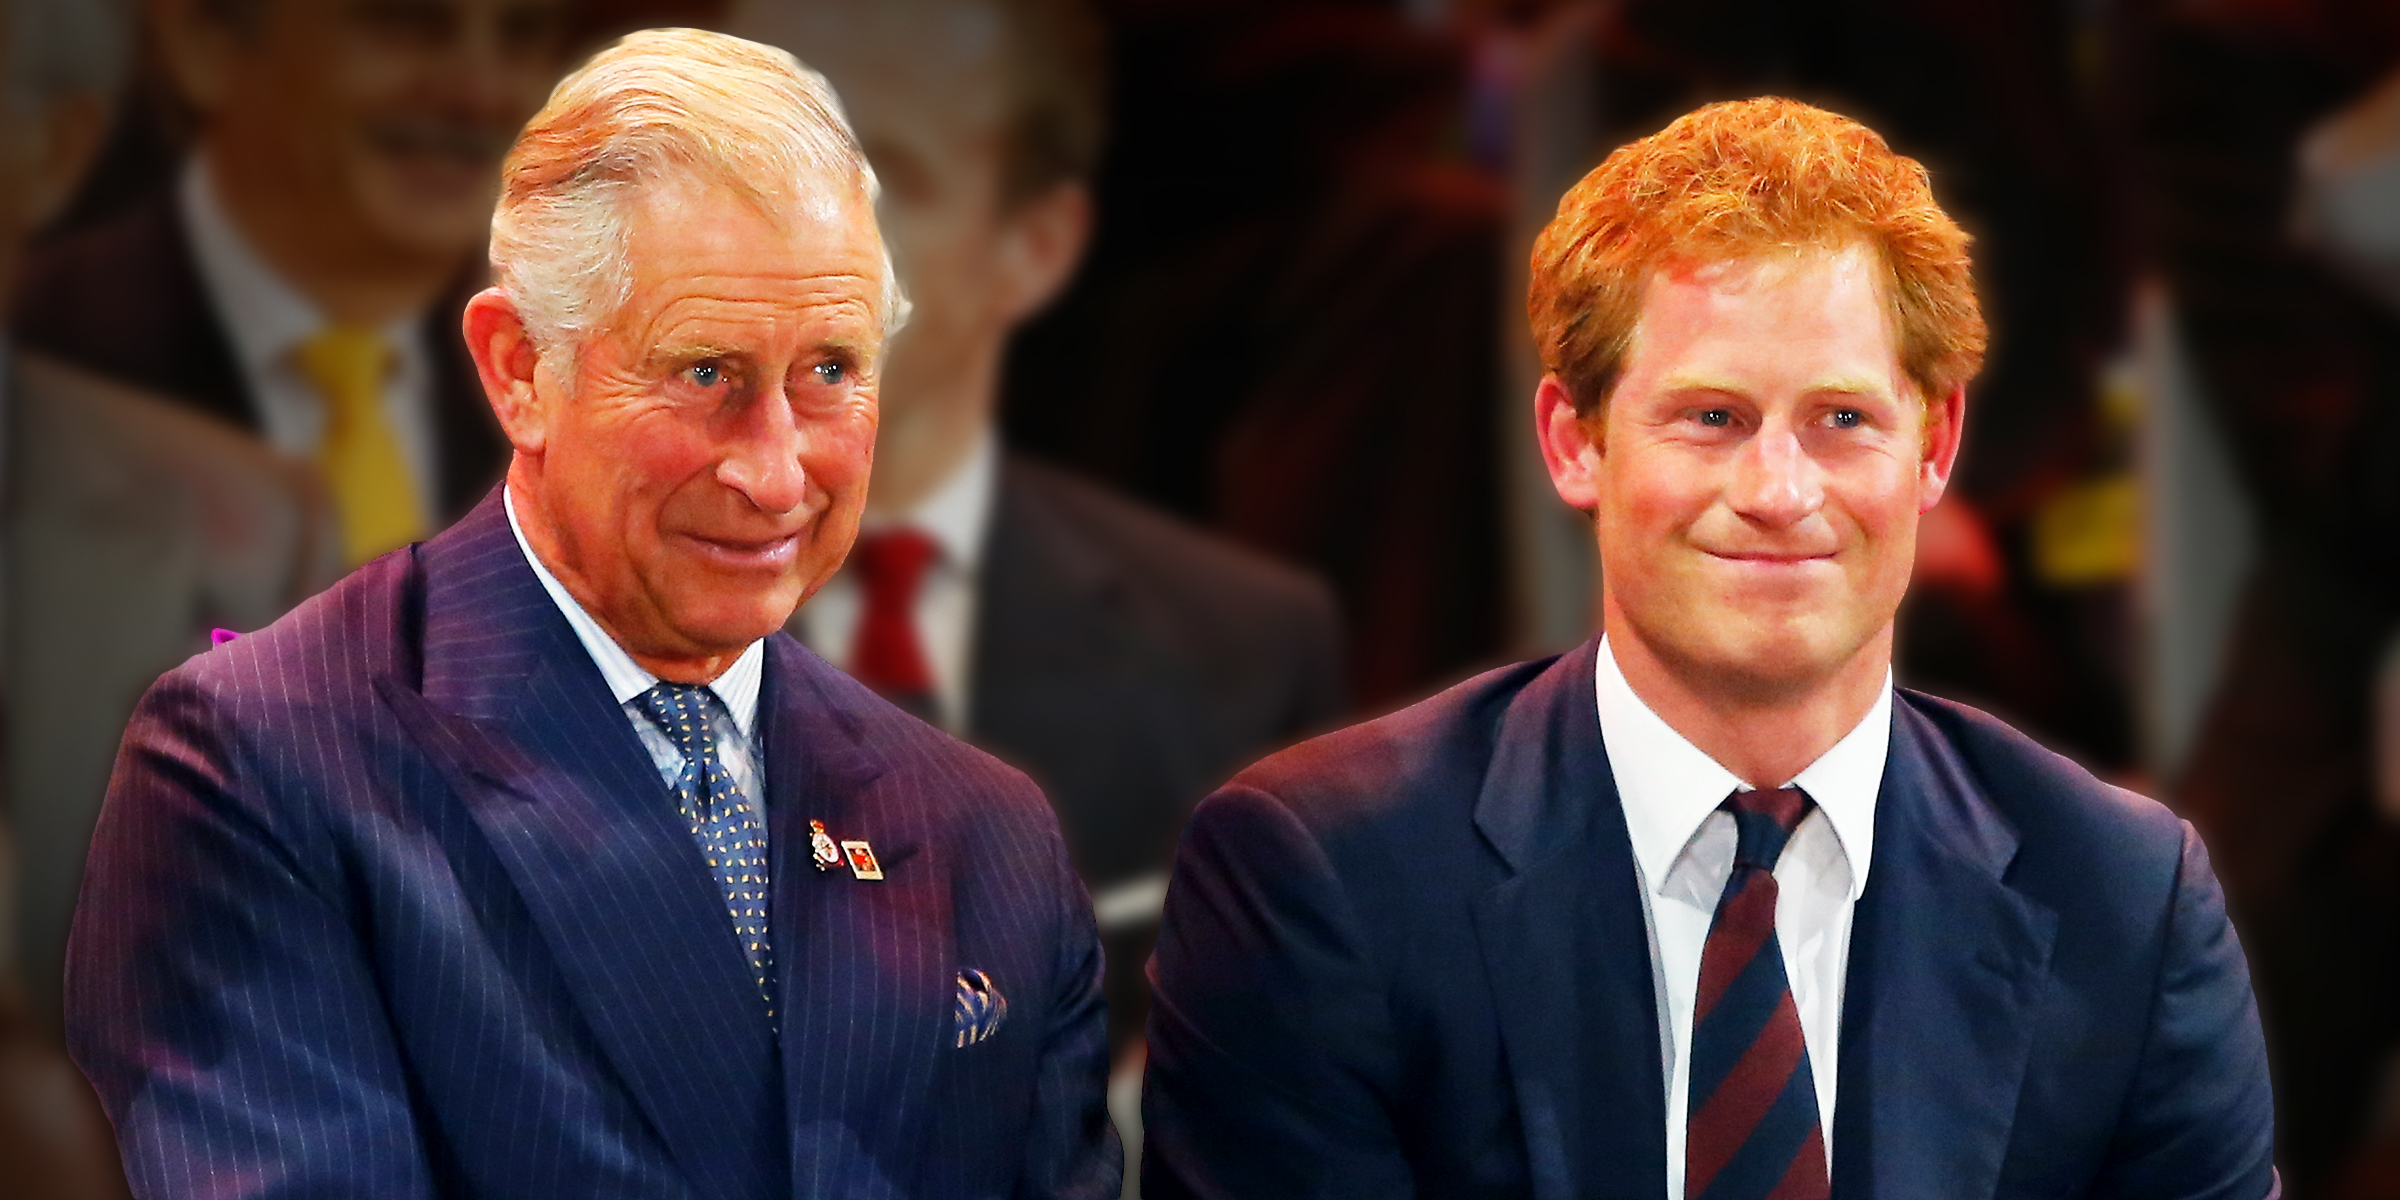 King Charles III and Prince Harry | Source: Getty Images